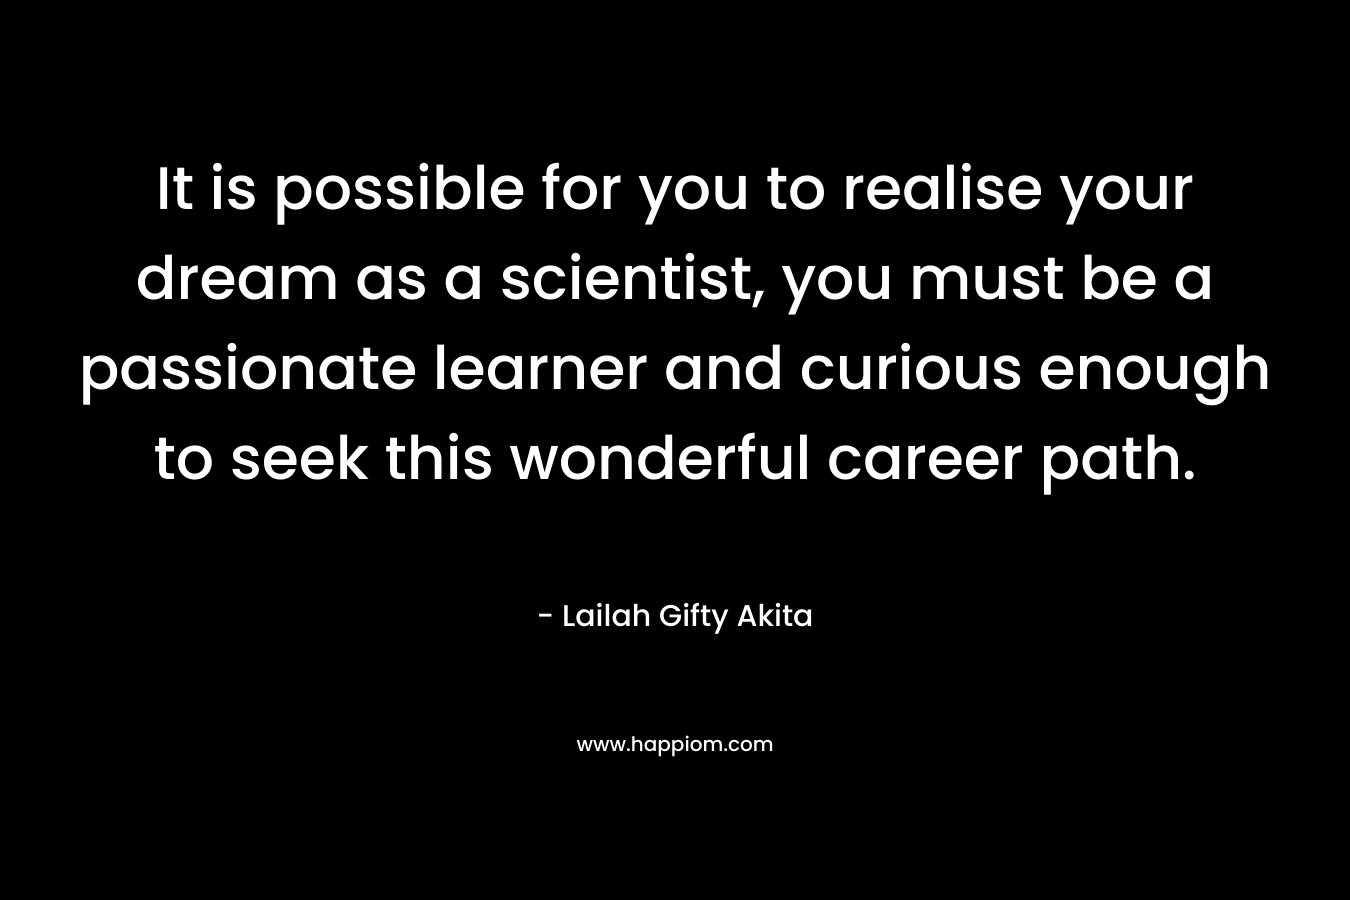 It is possible for you to realise your dream as a scientist, you must be a passionate learner and curious enough to seek this wonderful career path.